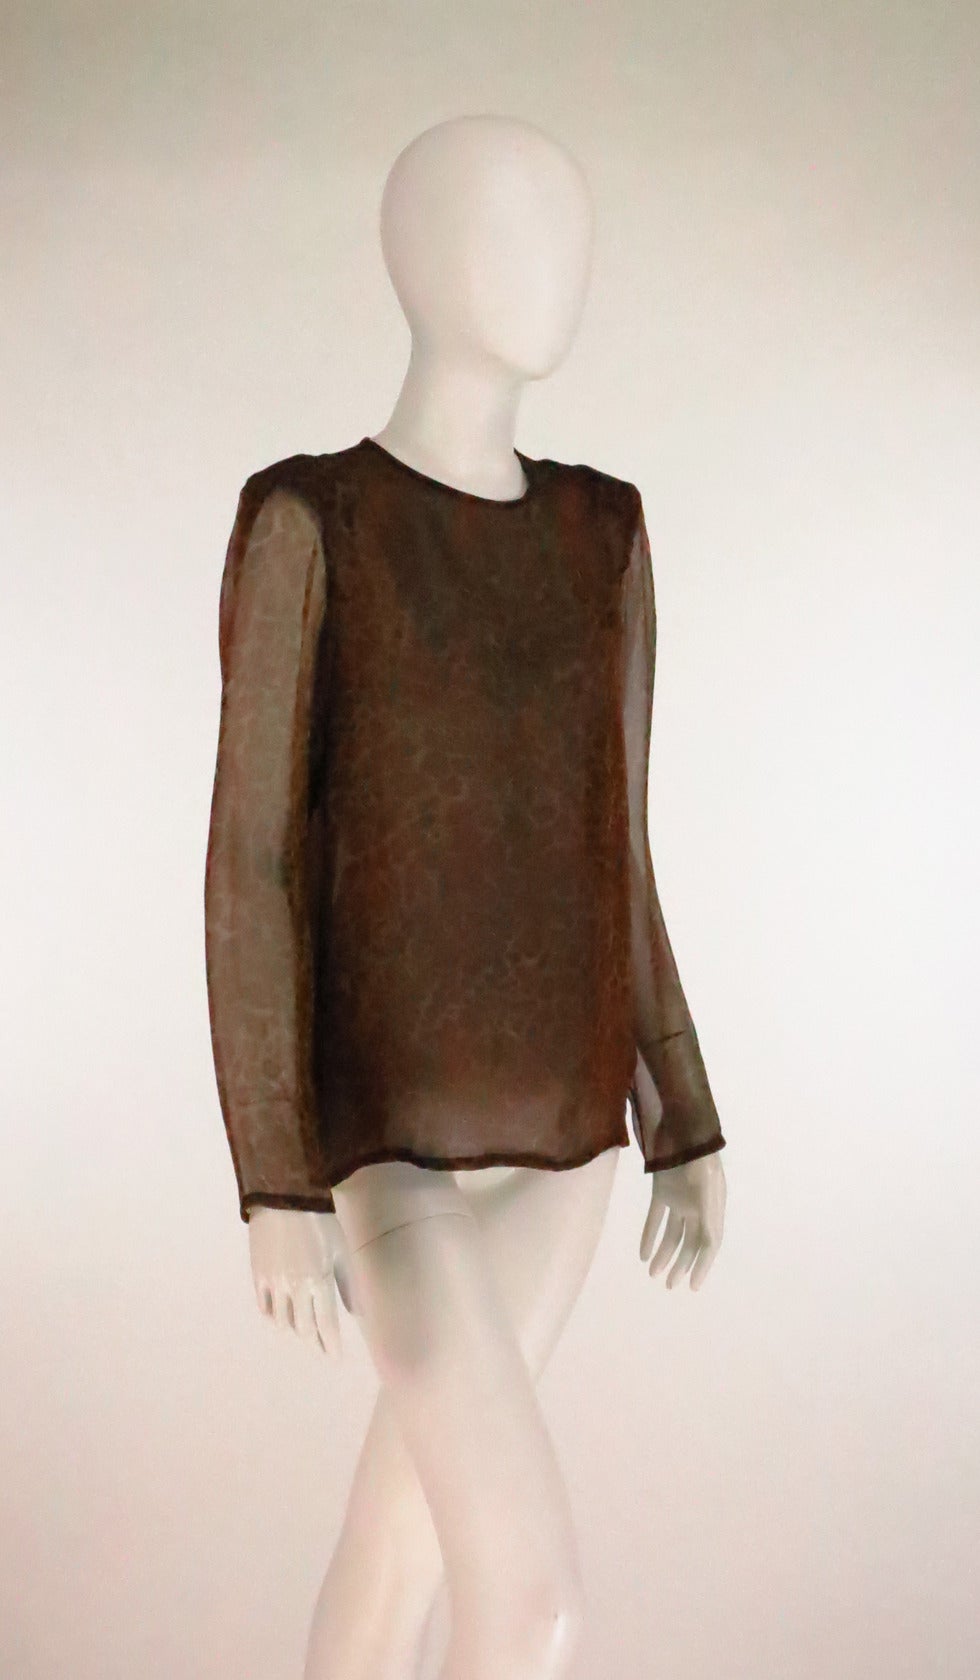 1990s Yves St Laurent leopard print silk chiffon blouse...Jewel neckline blouse has unlined long sheer sleeves with a hemmed cuff...The body of the blouse is lined in silk, pull on style with a single button and loop back neck closure..Lightly